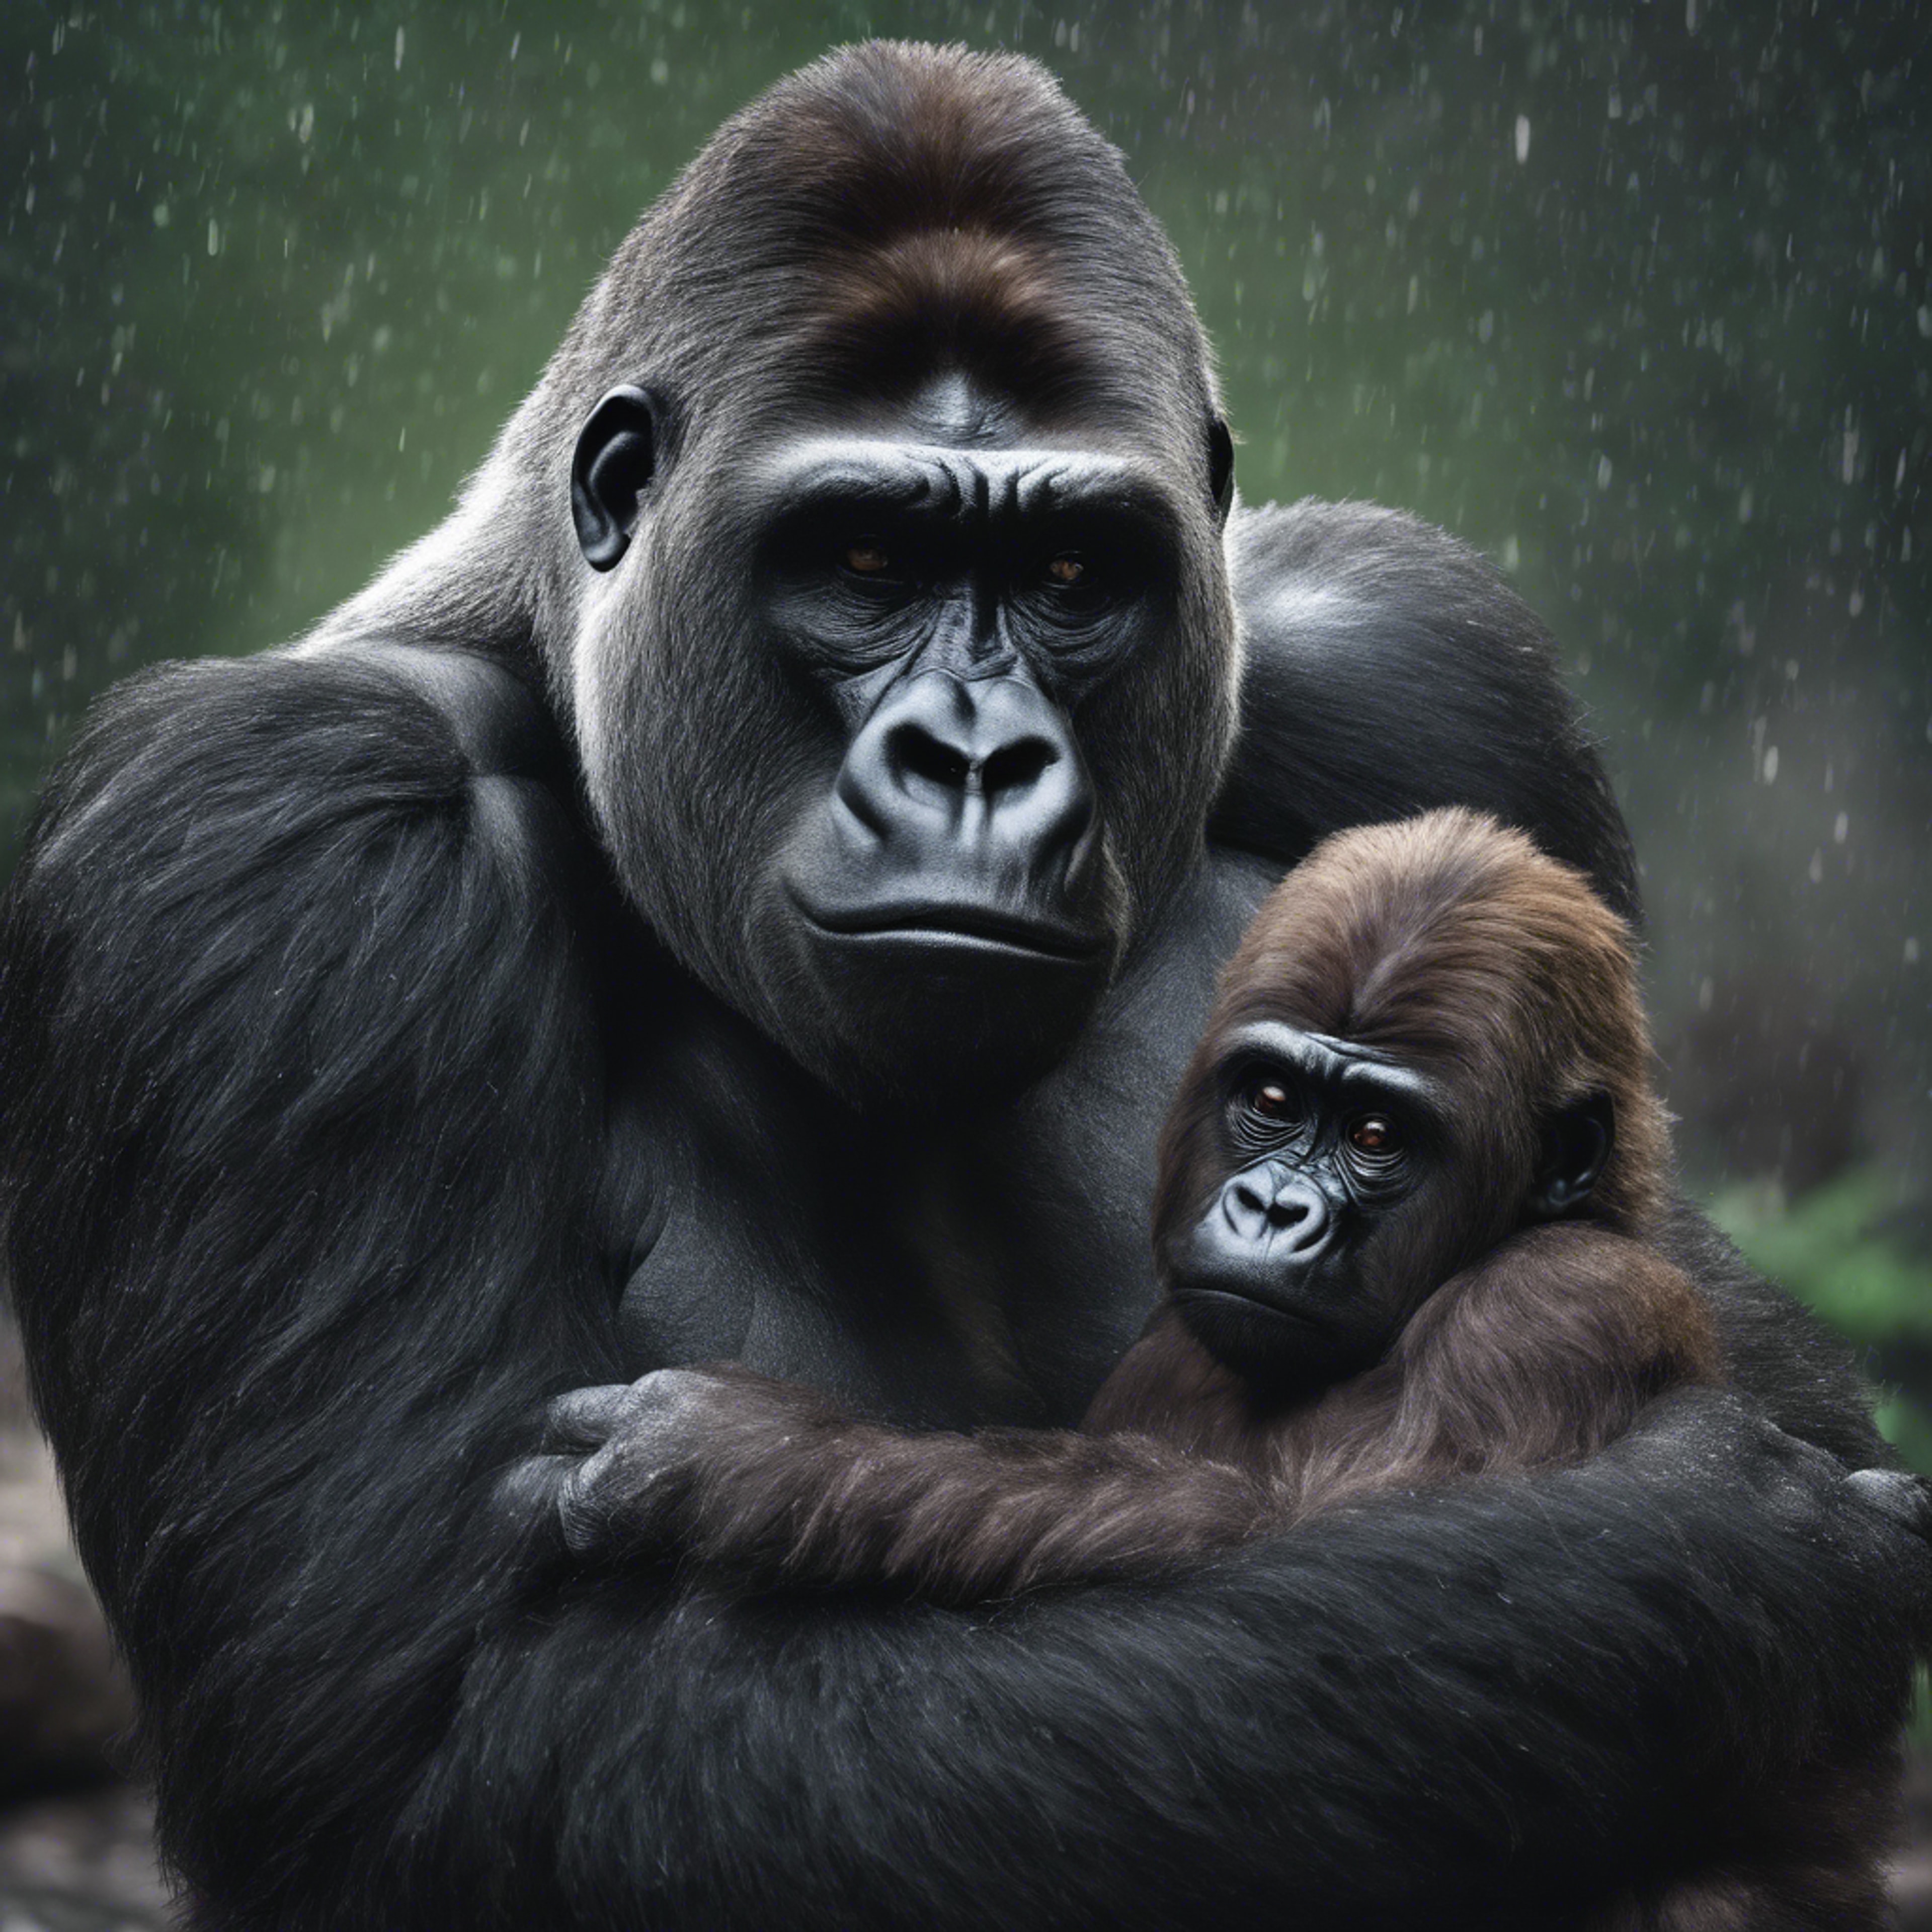 A soft, sensitive study of a gorilla father gently comforting his scared offspring during a thunderstorm. 墙纸[6d897e1fa87d4d60b202]